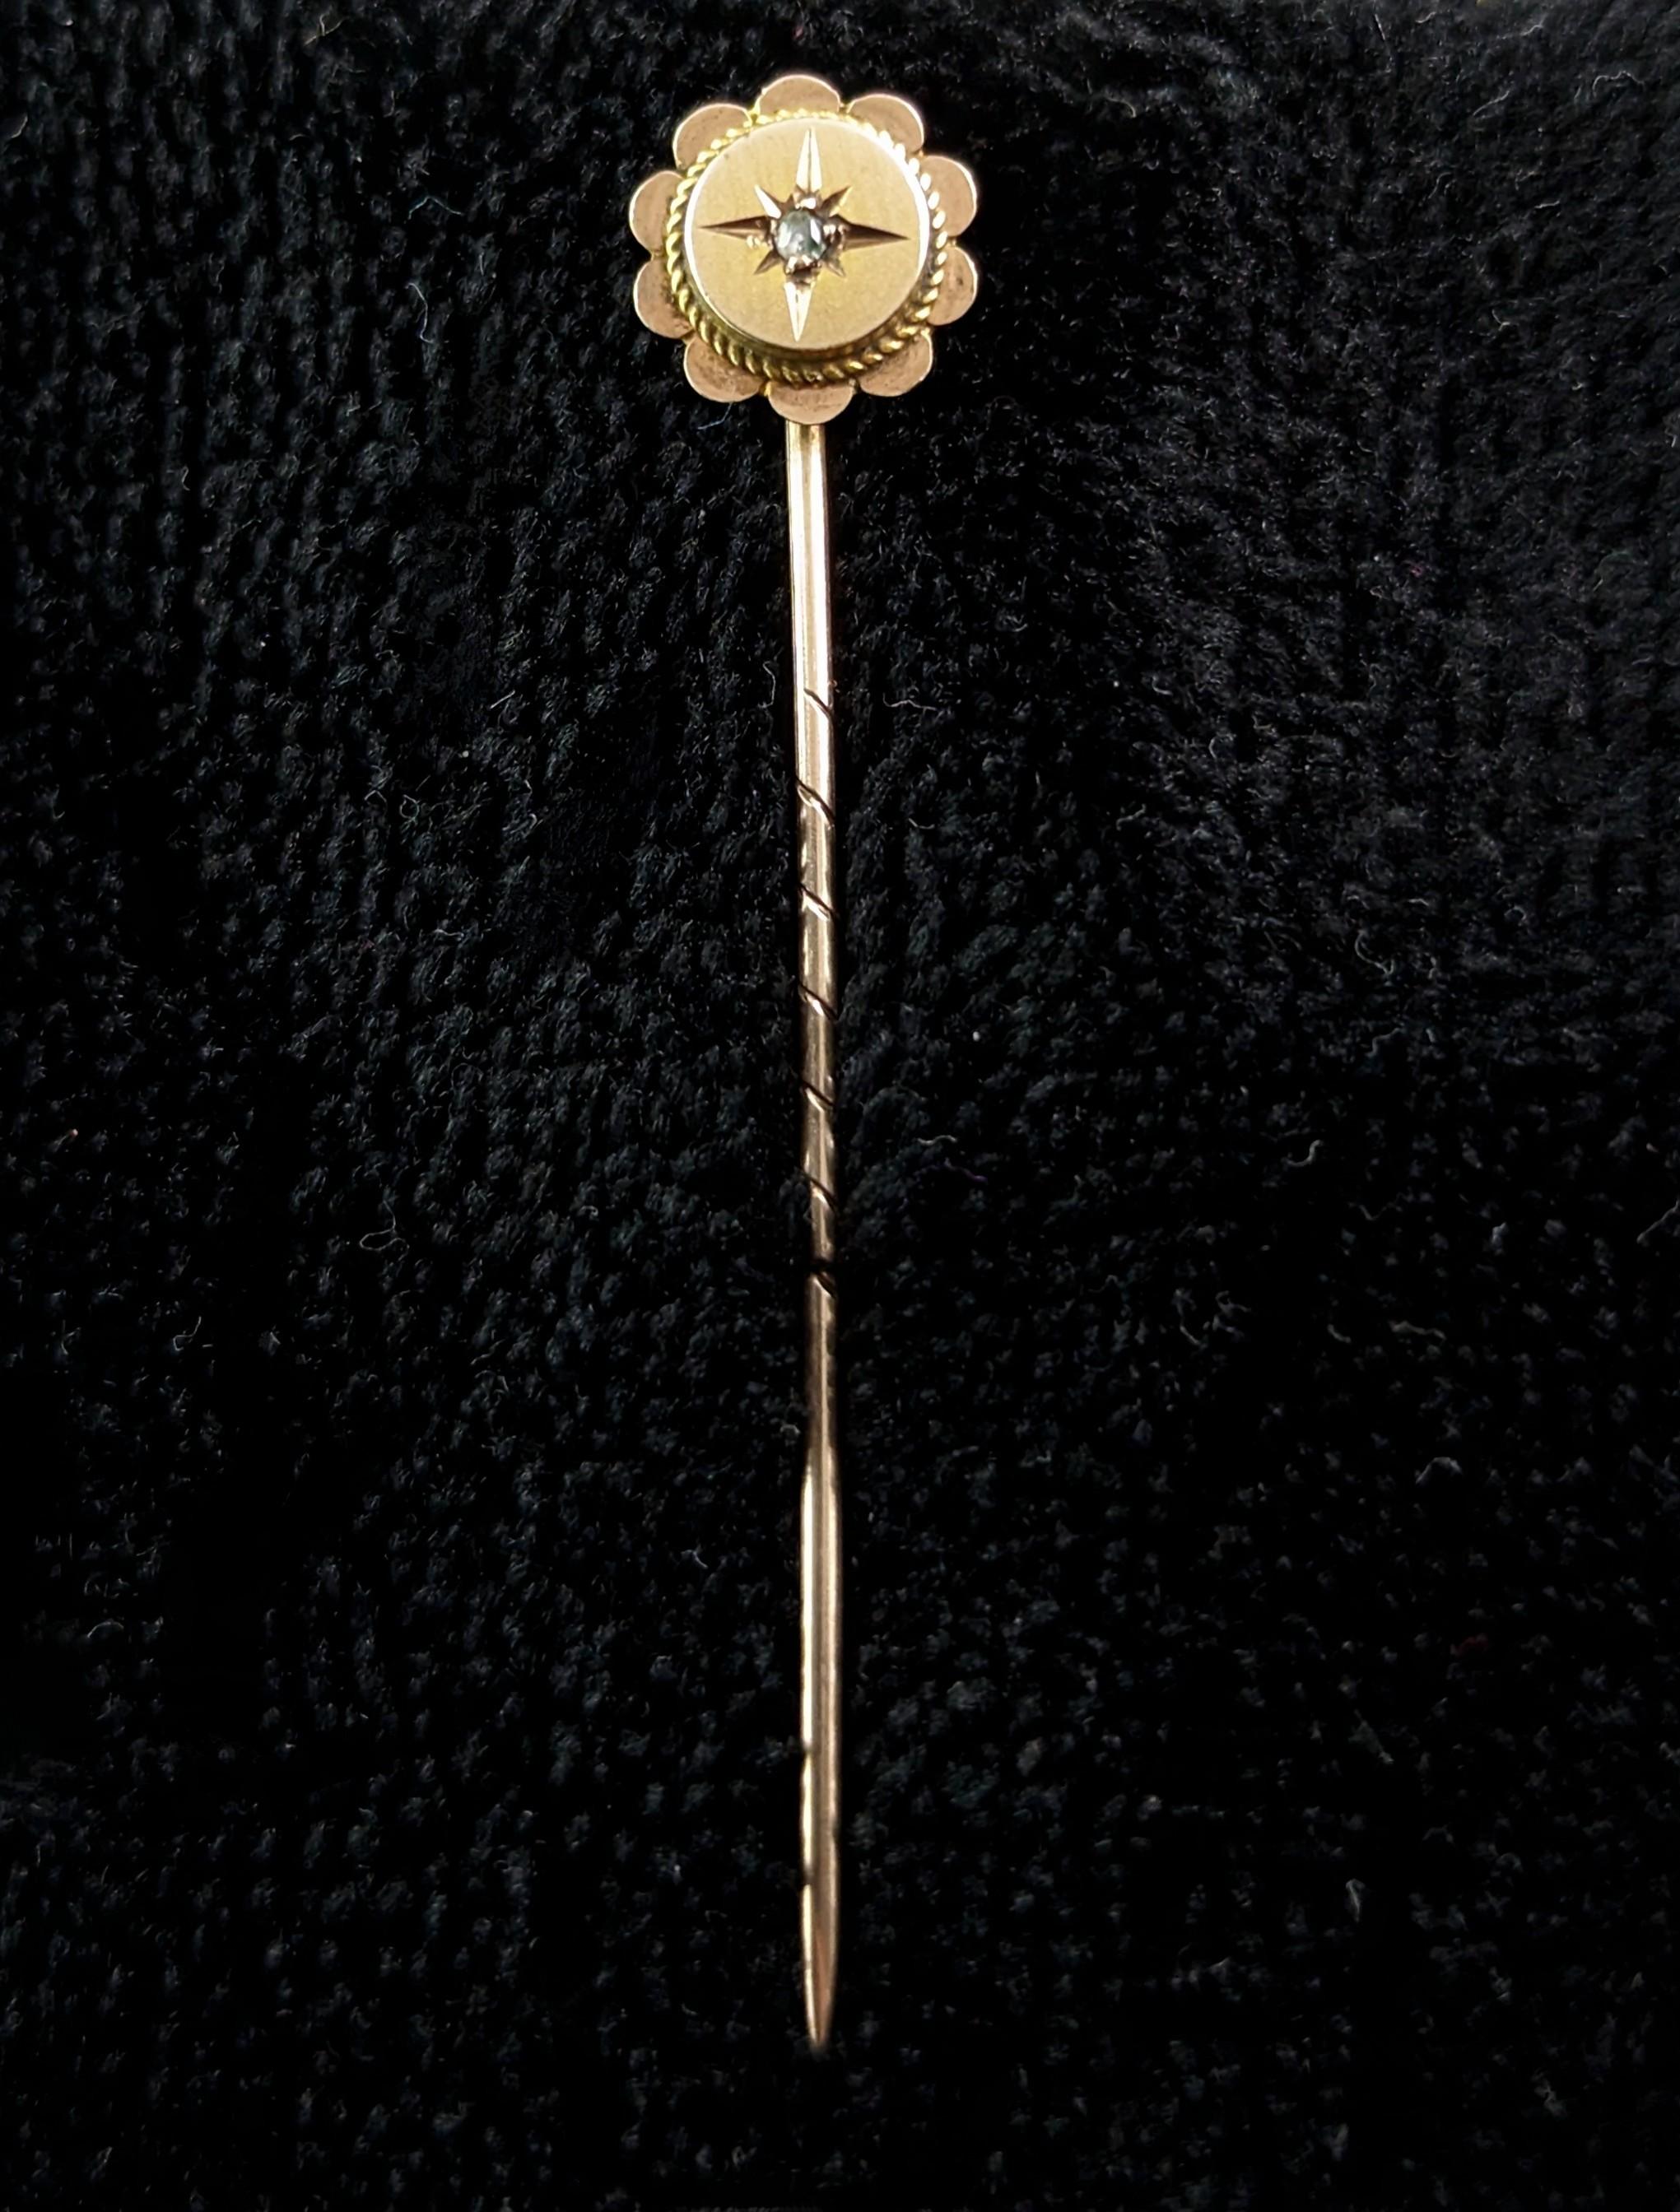 An attractive antique 9ct gold and diamond stick pin.

A 9ct yellow gold stick pin with an almost floral shaped terminal set with a single diamond chip in a gypsy style star setting.

The stick pin also known as a tie or cravat pin started out its